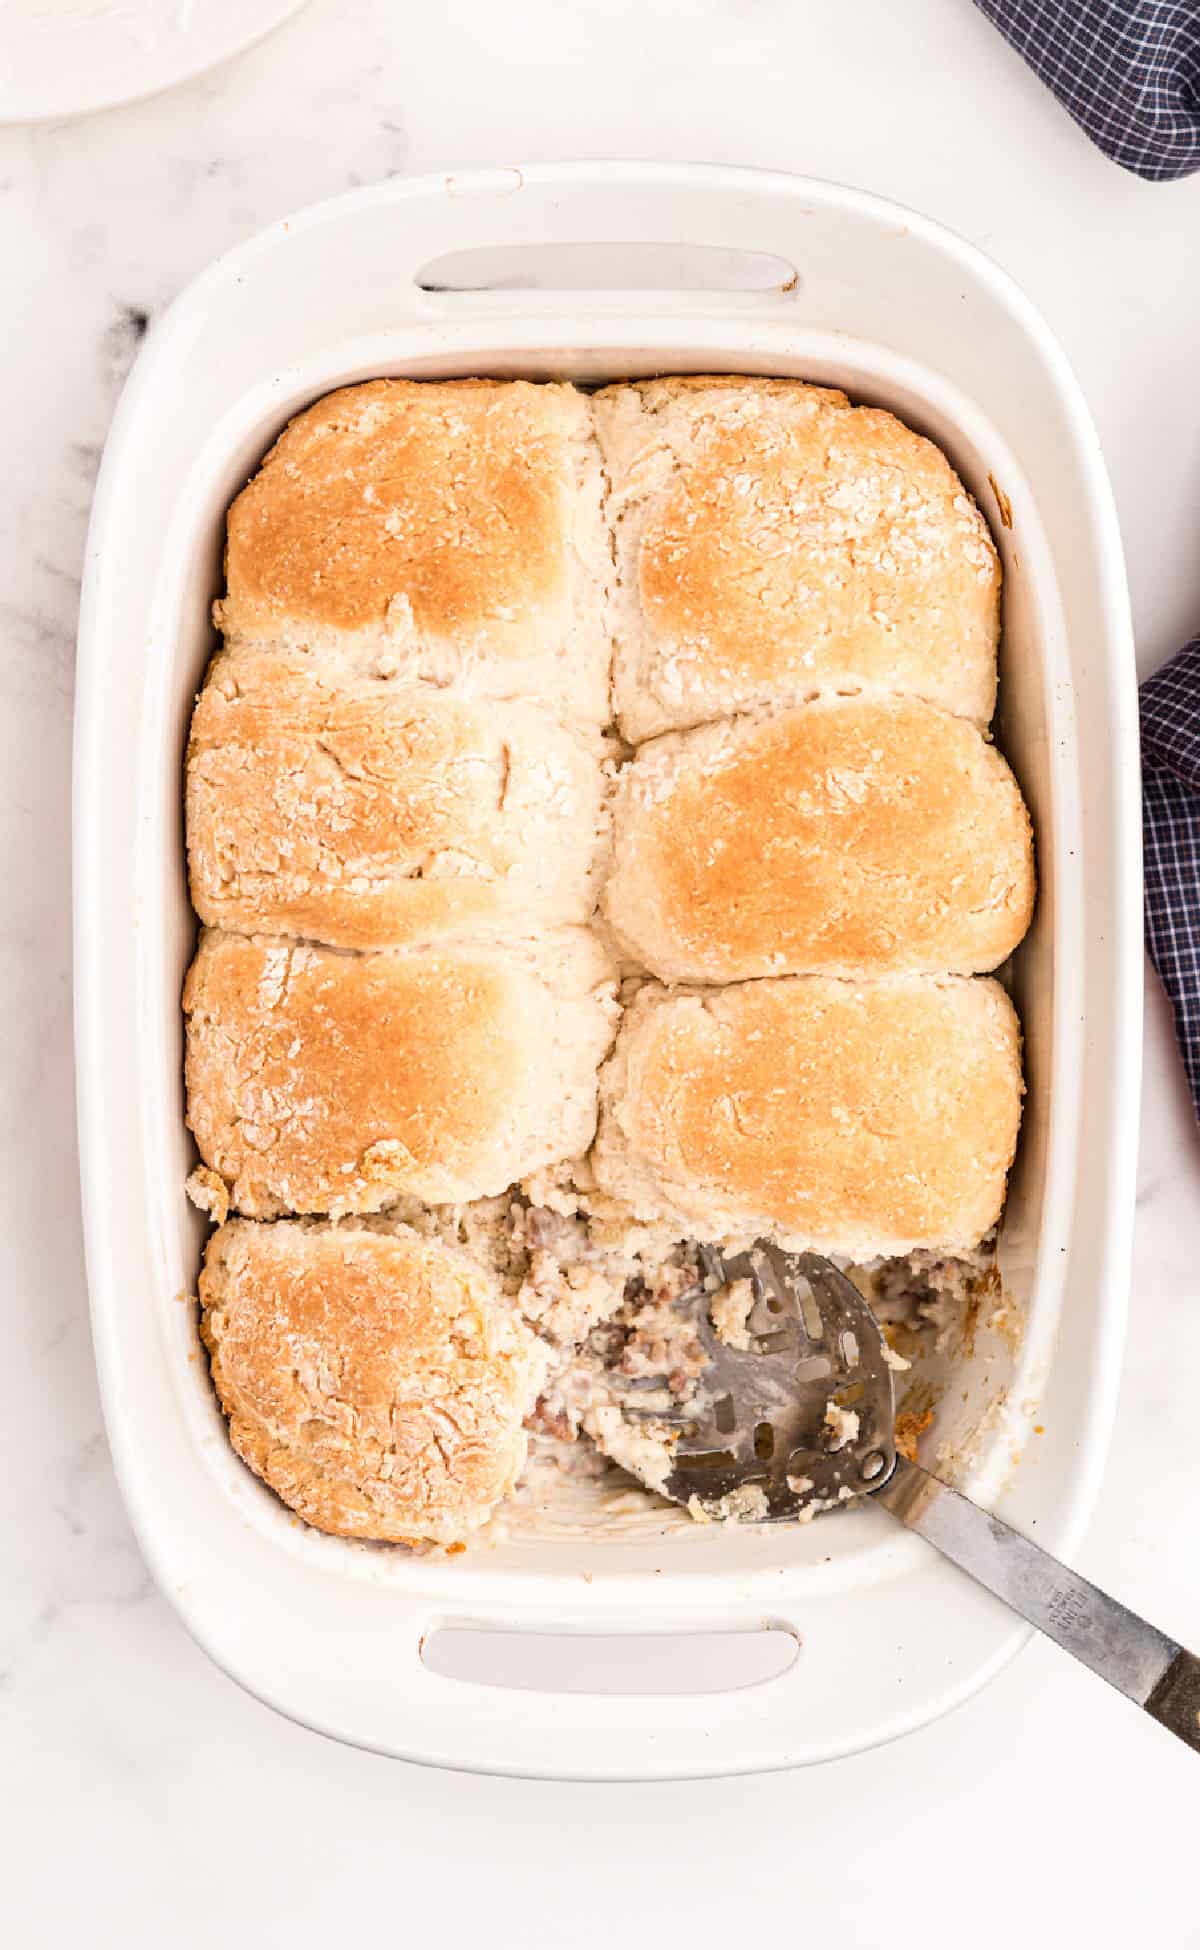 Sausage and gravy casserole topped with homemade biscuits in 13x9 baking dish.